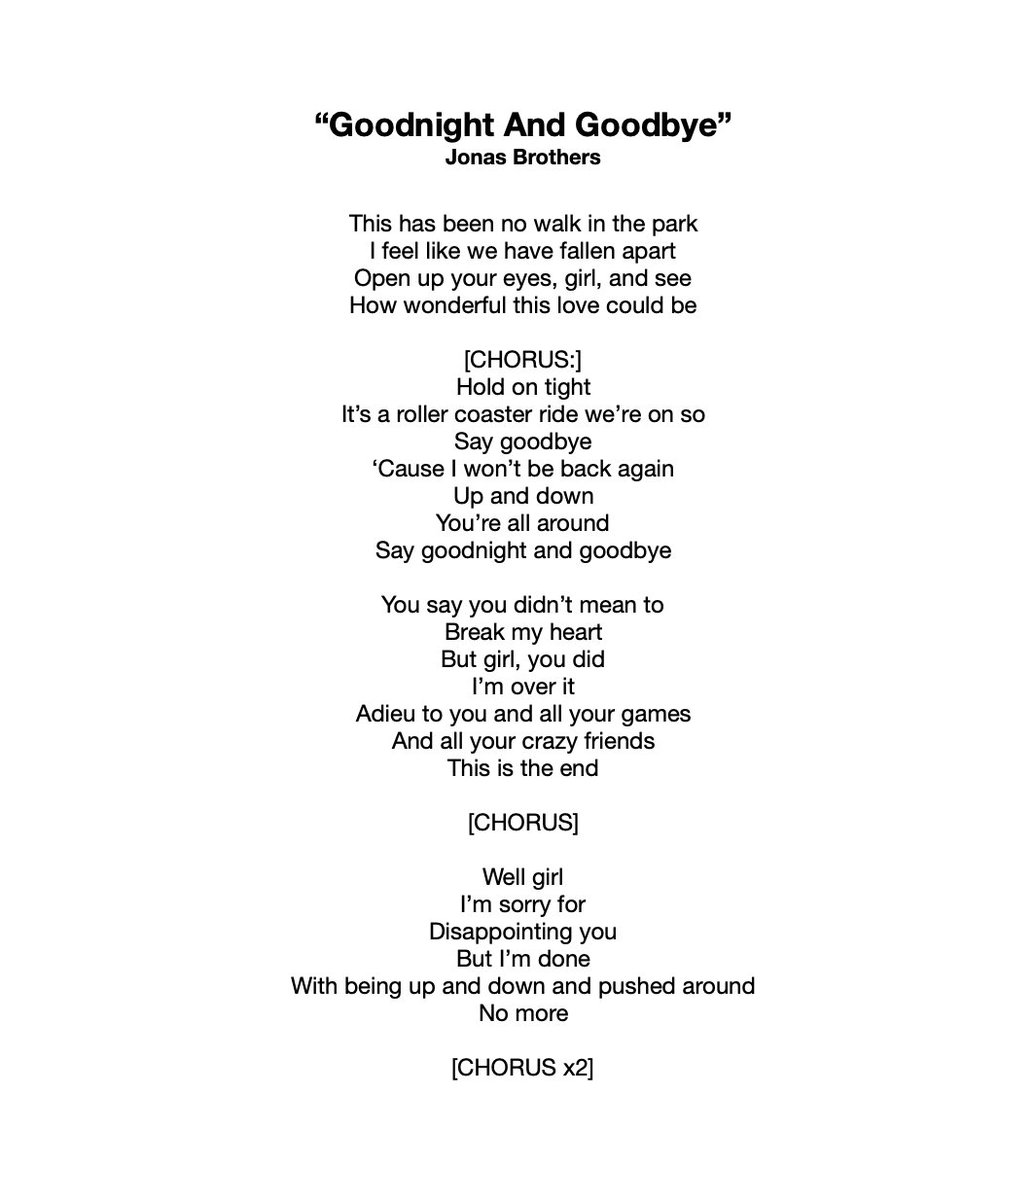 Other songs on the album that are either confirmed or assumed to be about Nick and Miley’s relationship include “Goodnight and Goodbye”, “Still In Love With You”, “Games”, and “Inseparable”.